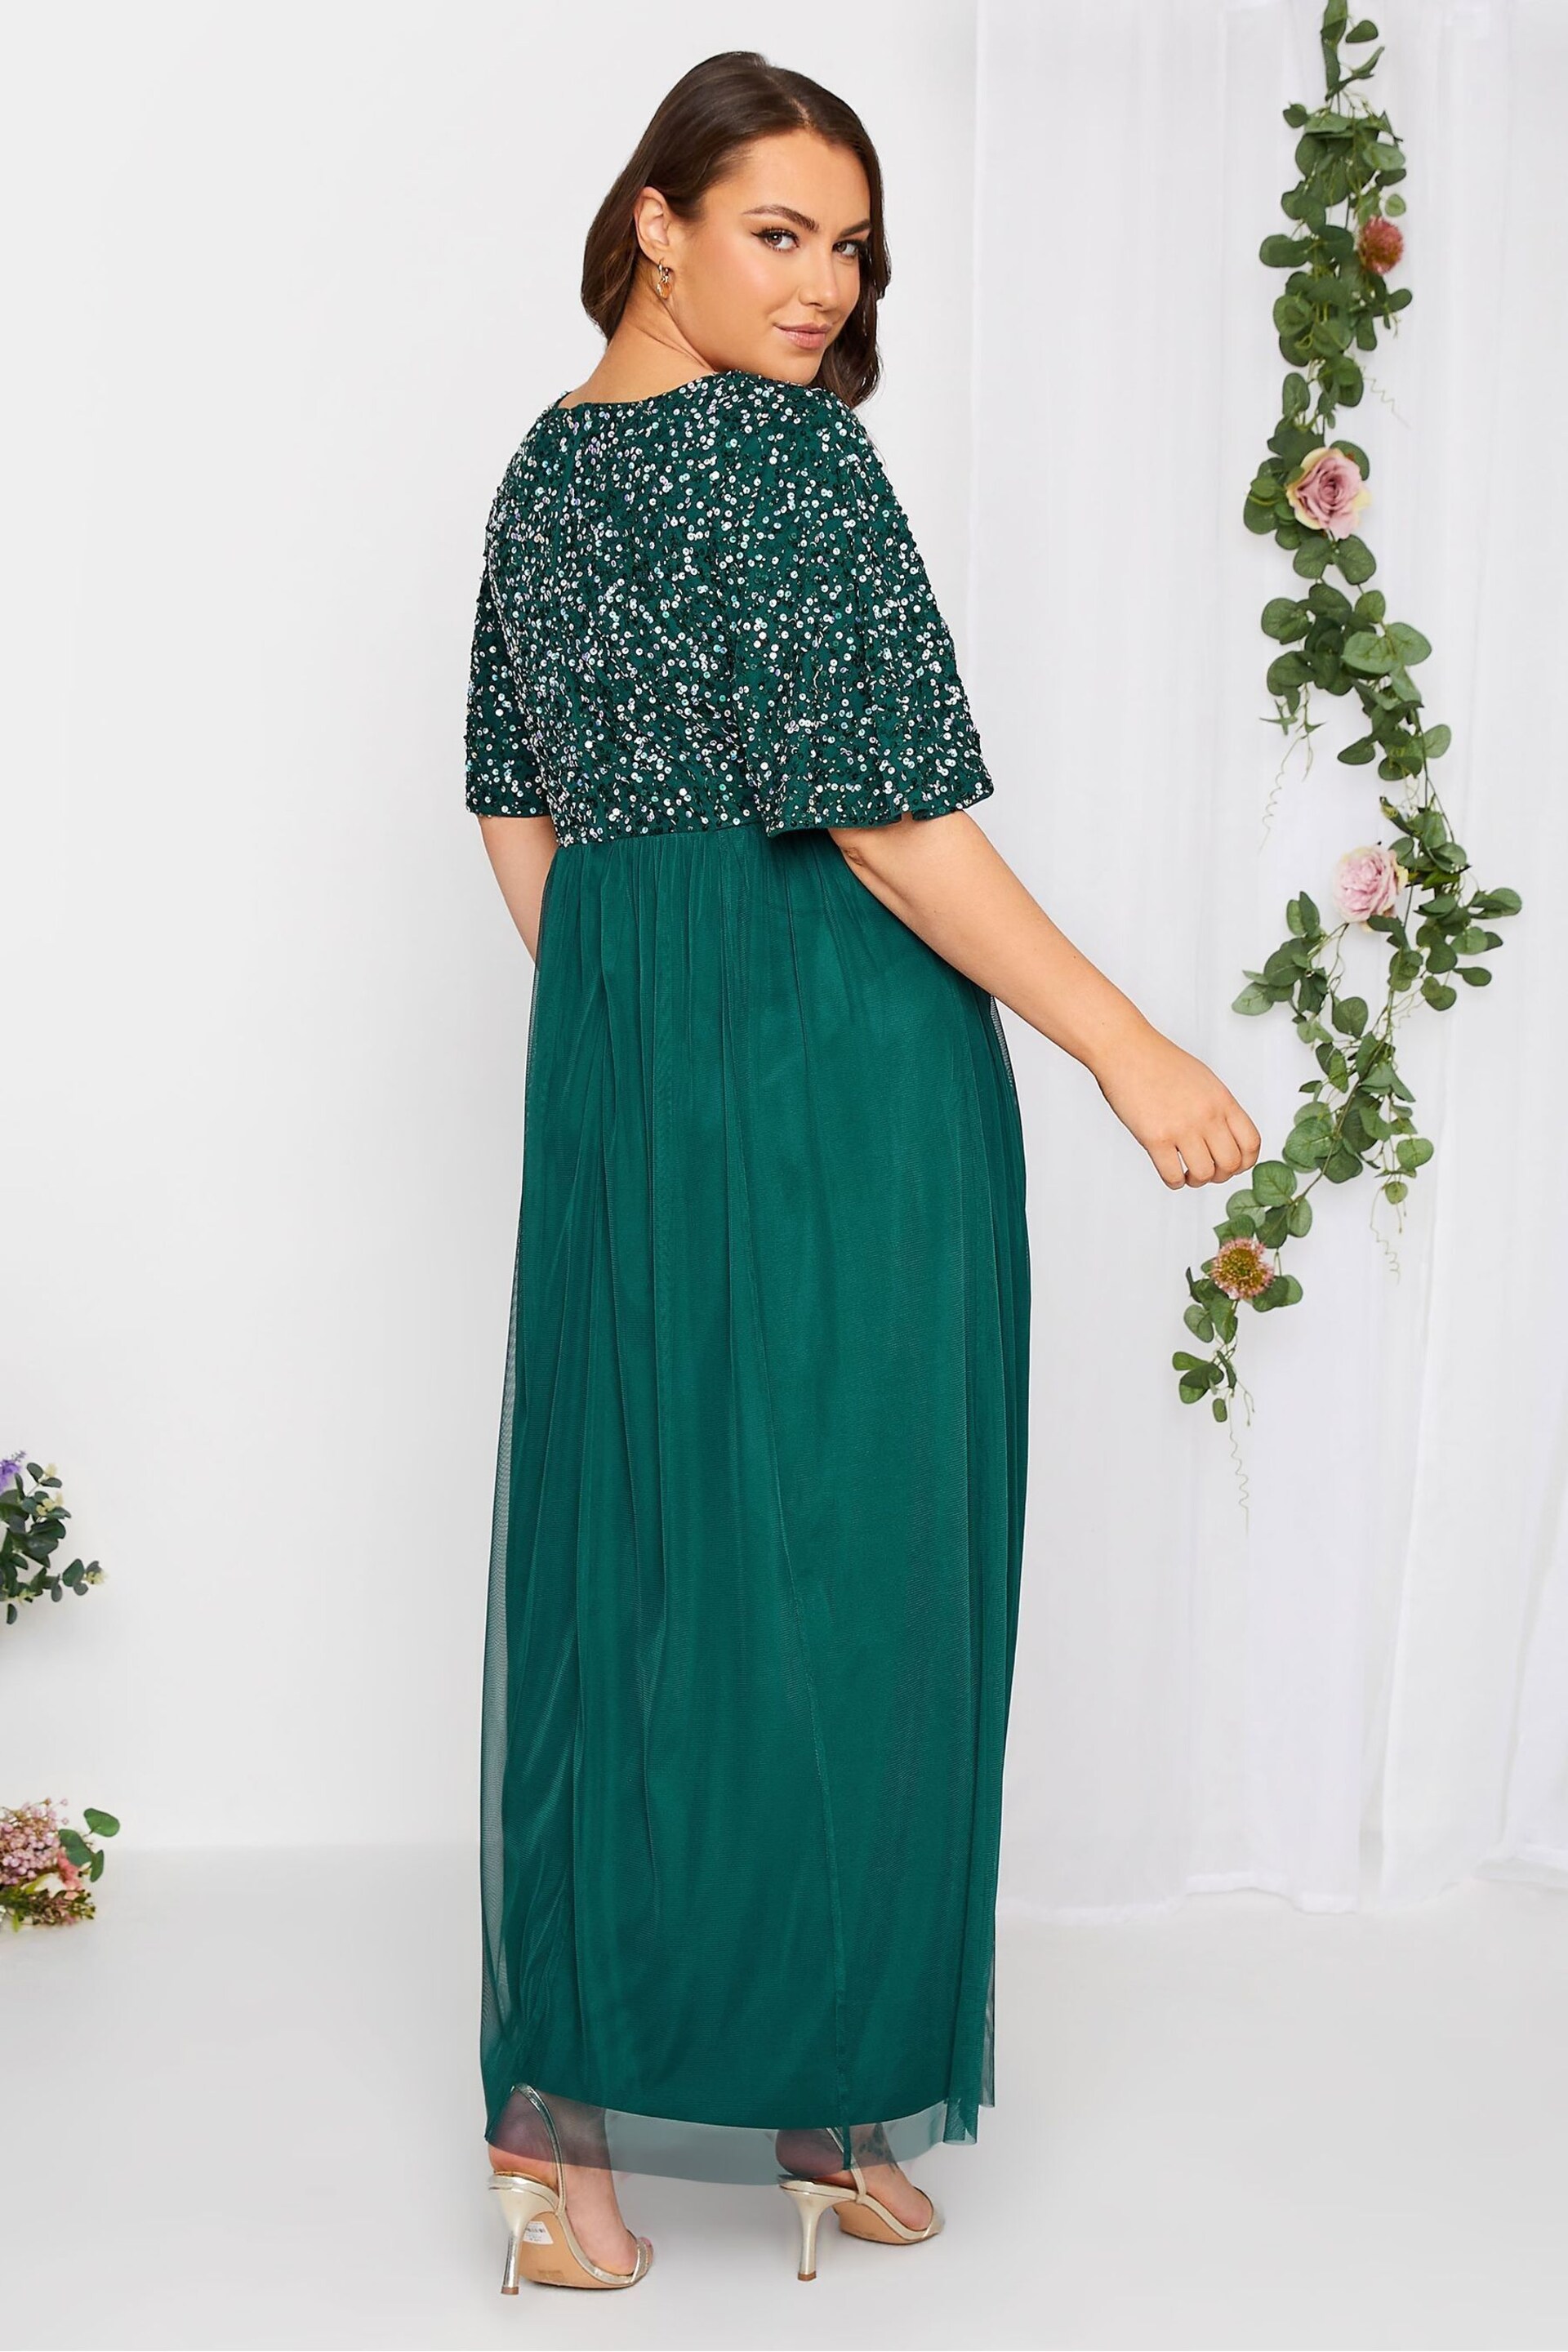 Yours Curve Green Luxe Embellished Angel Sleeve Maxi Dress - Image 2 of 5